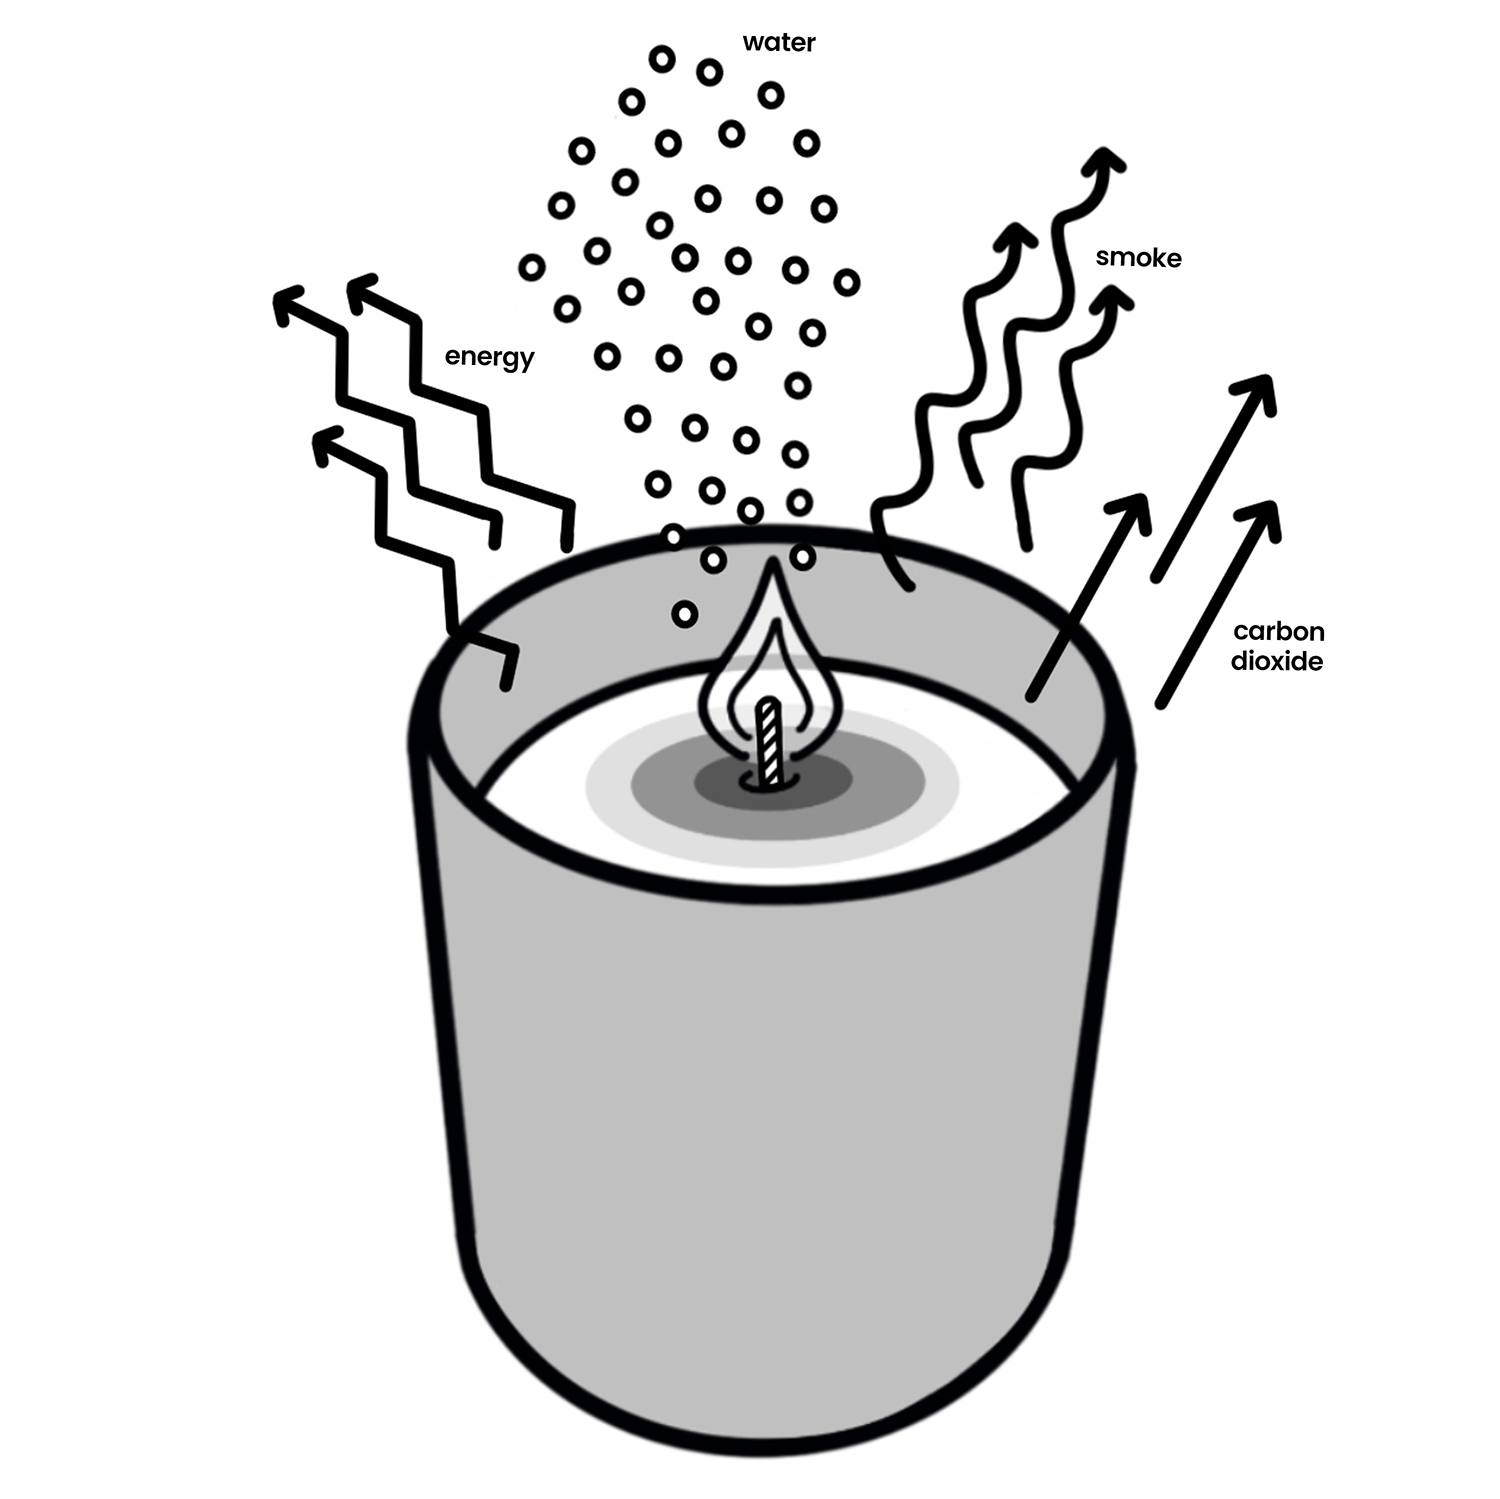 Hand-drawn digital illustration of a burning candle in a jar; the drawing is diagrammed to show the carbon dioxide, smoke, water, and energy outputs of the candle